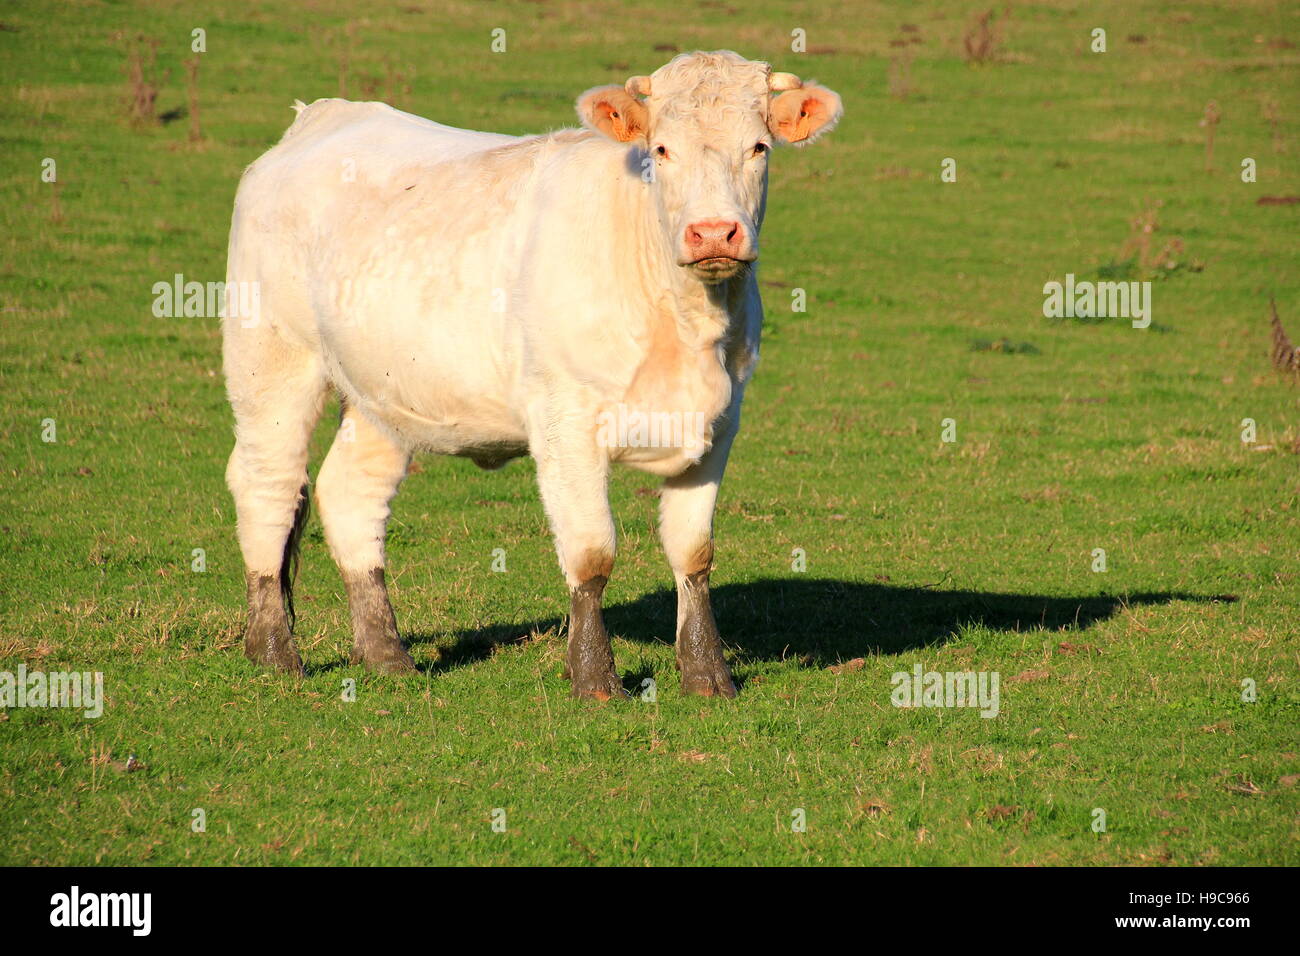 Curious white cow with dirty legs Stock Photo